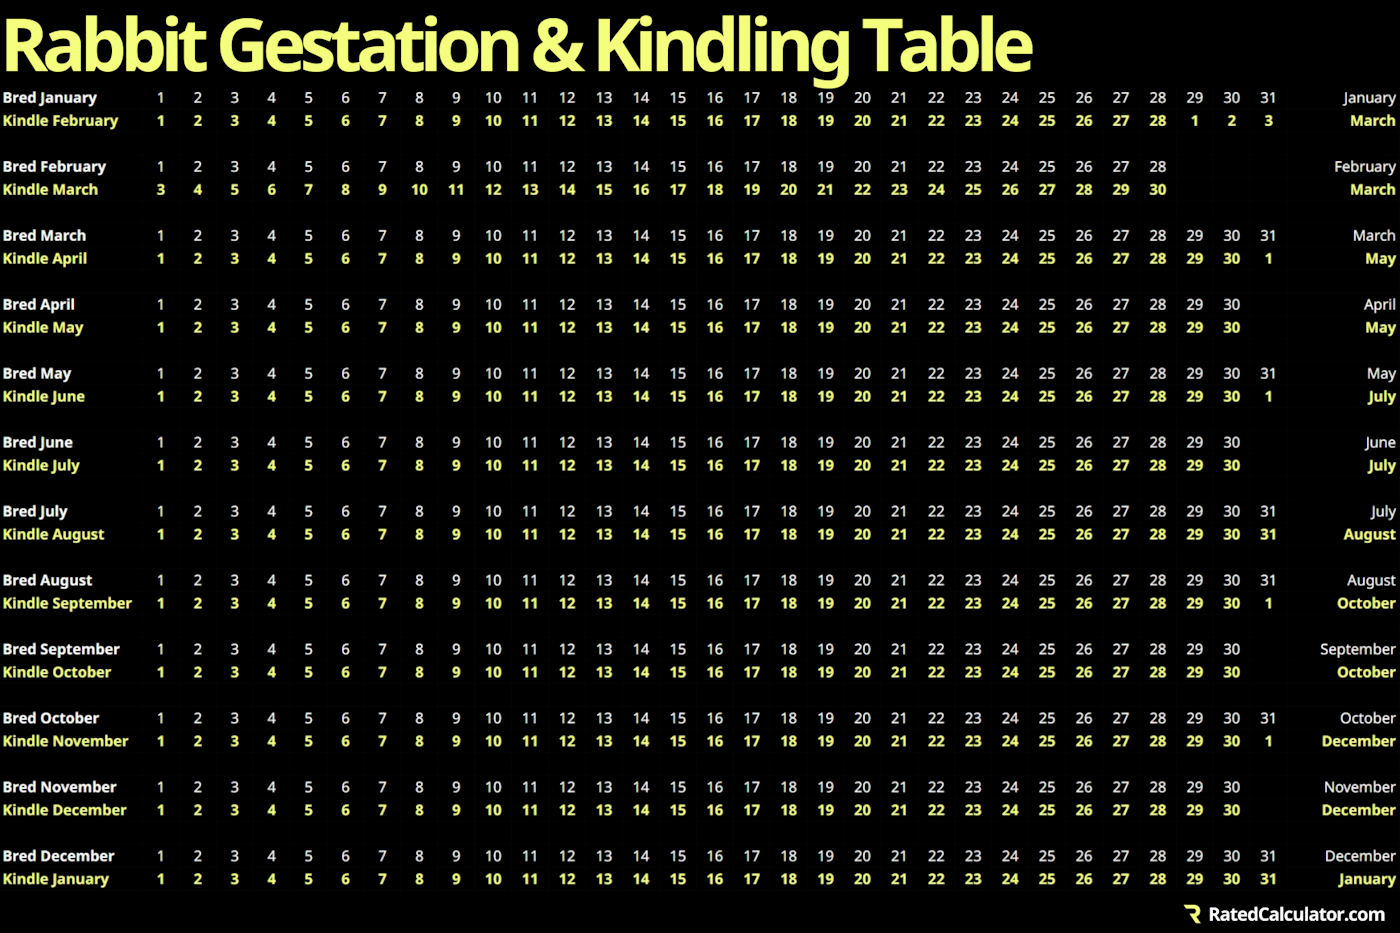 Rabbit gestation and kindling table for the entire year